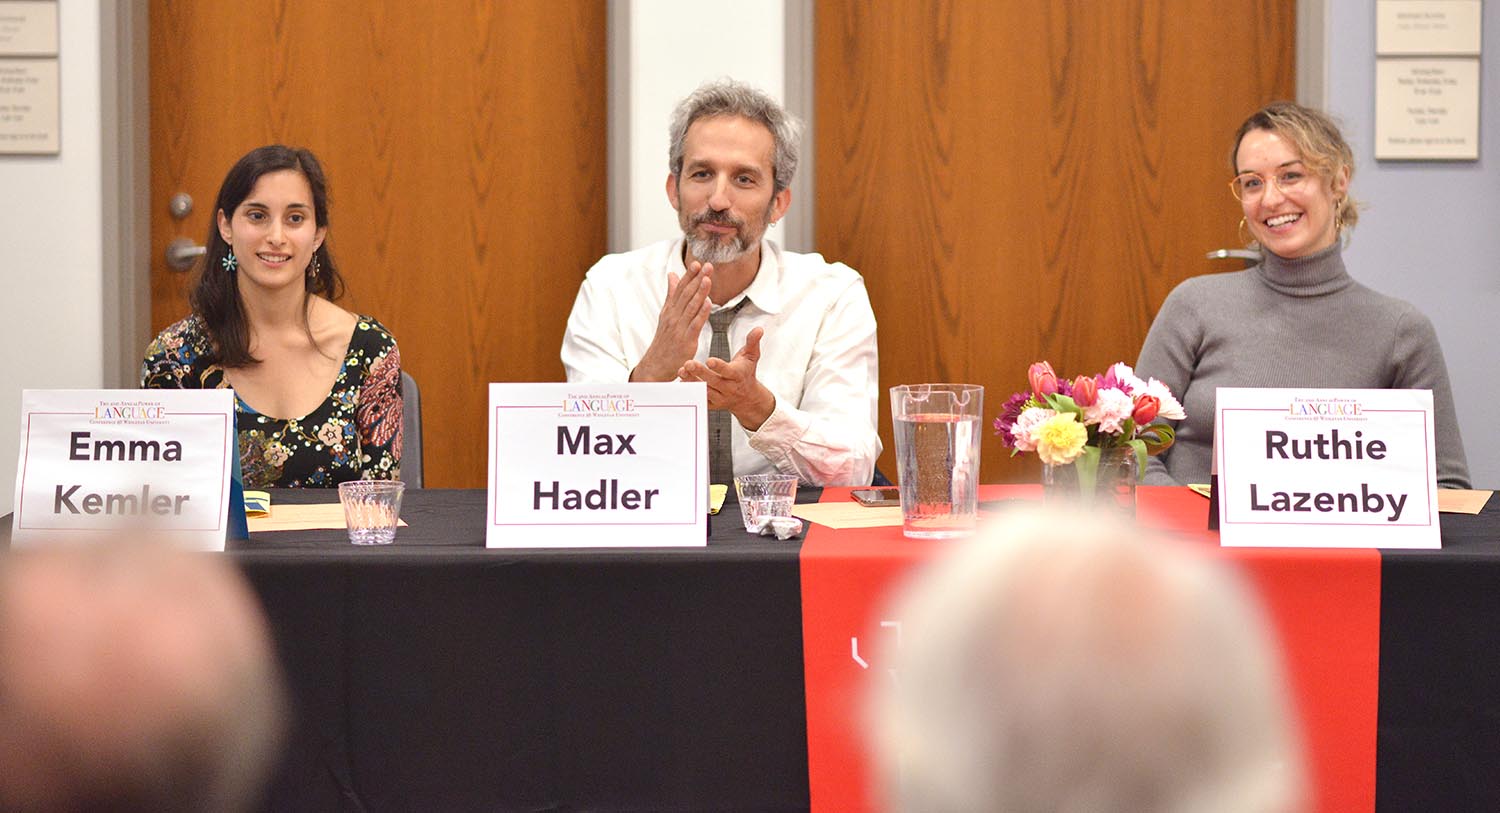 Max Hadler grew up around many Spanish speakers and “many soccer fans” in New Haven, Conn. “Speaking the same language helps one identify with people,” he said. “Early childhood education with language immersion has to be a priority. When you are immersed, that’s when you’ll really learn the language.”